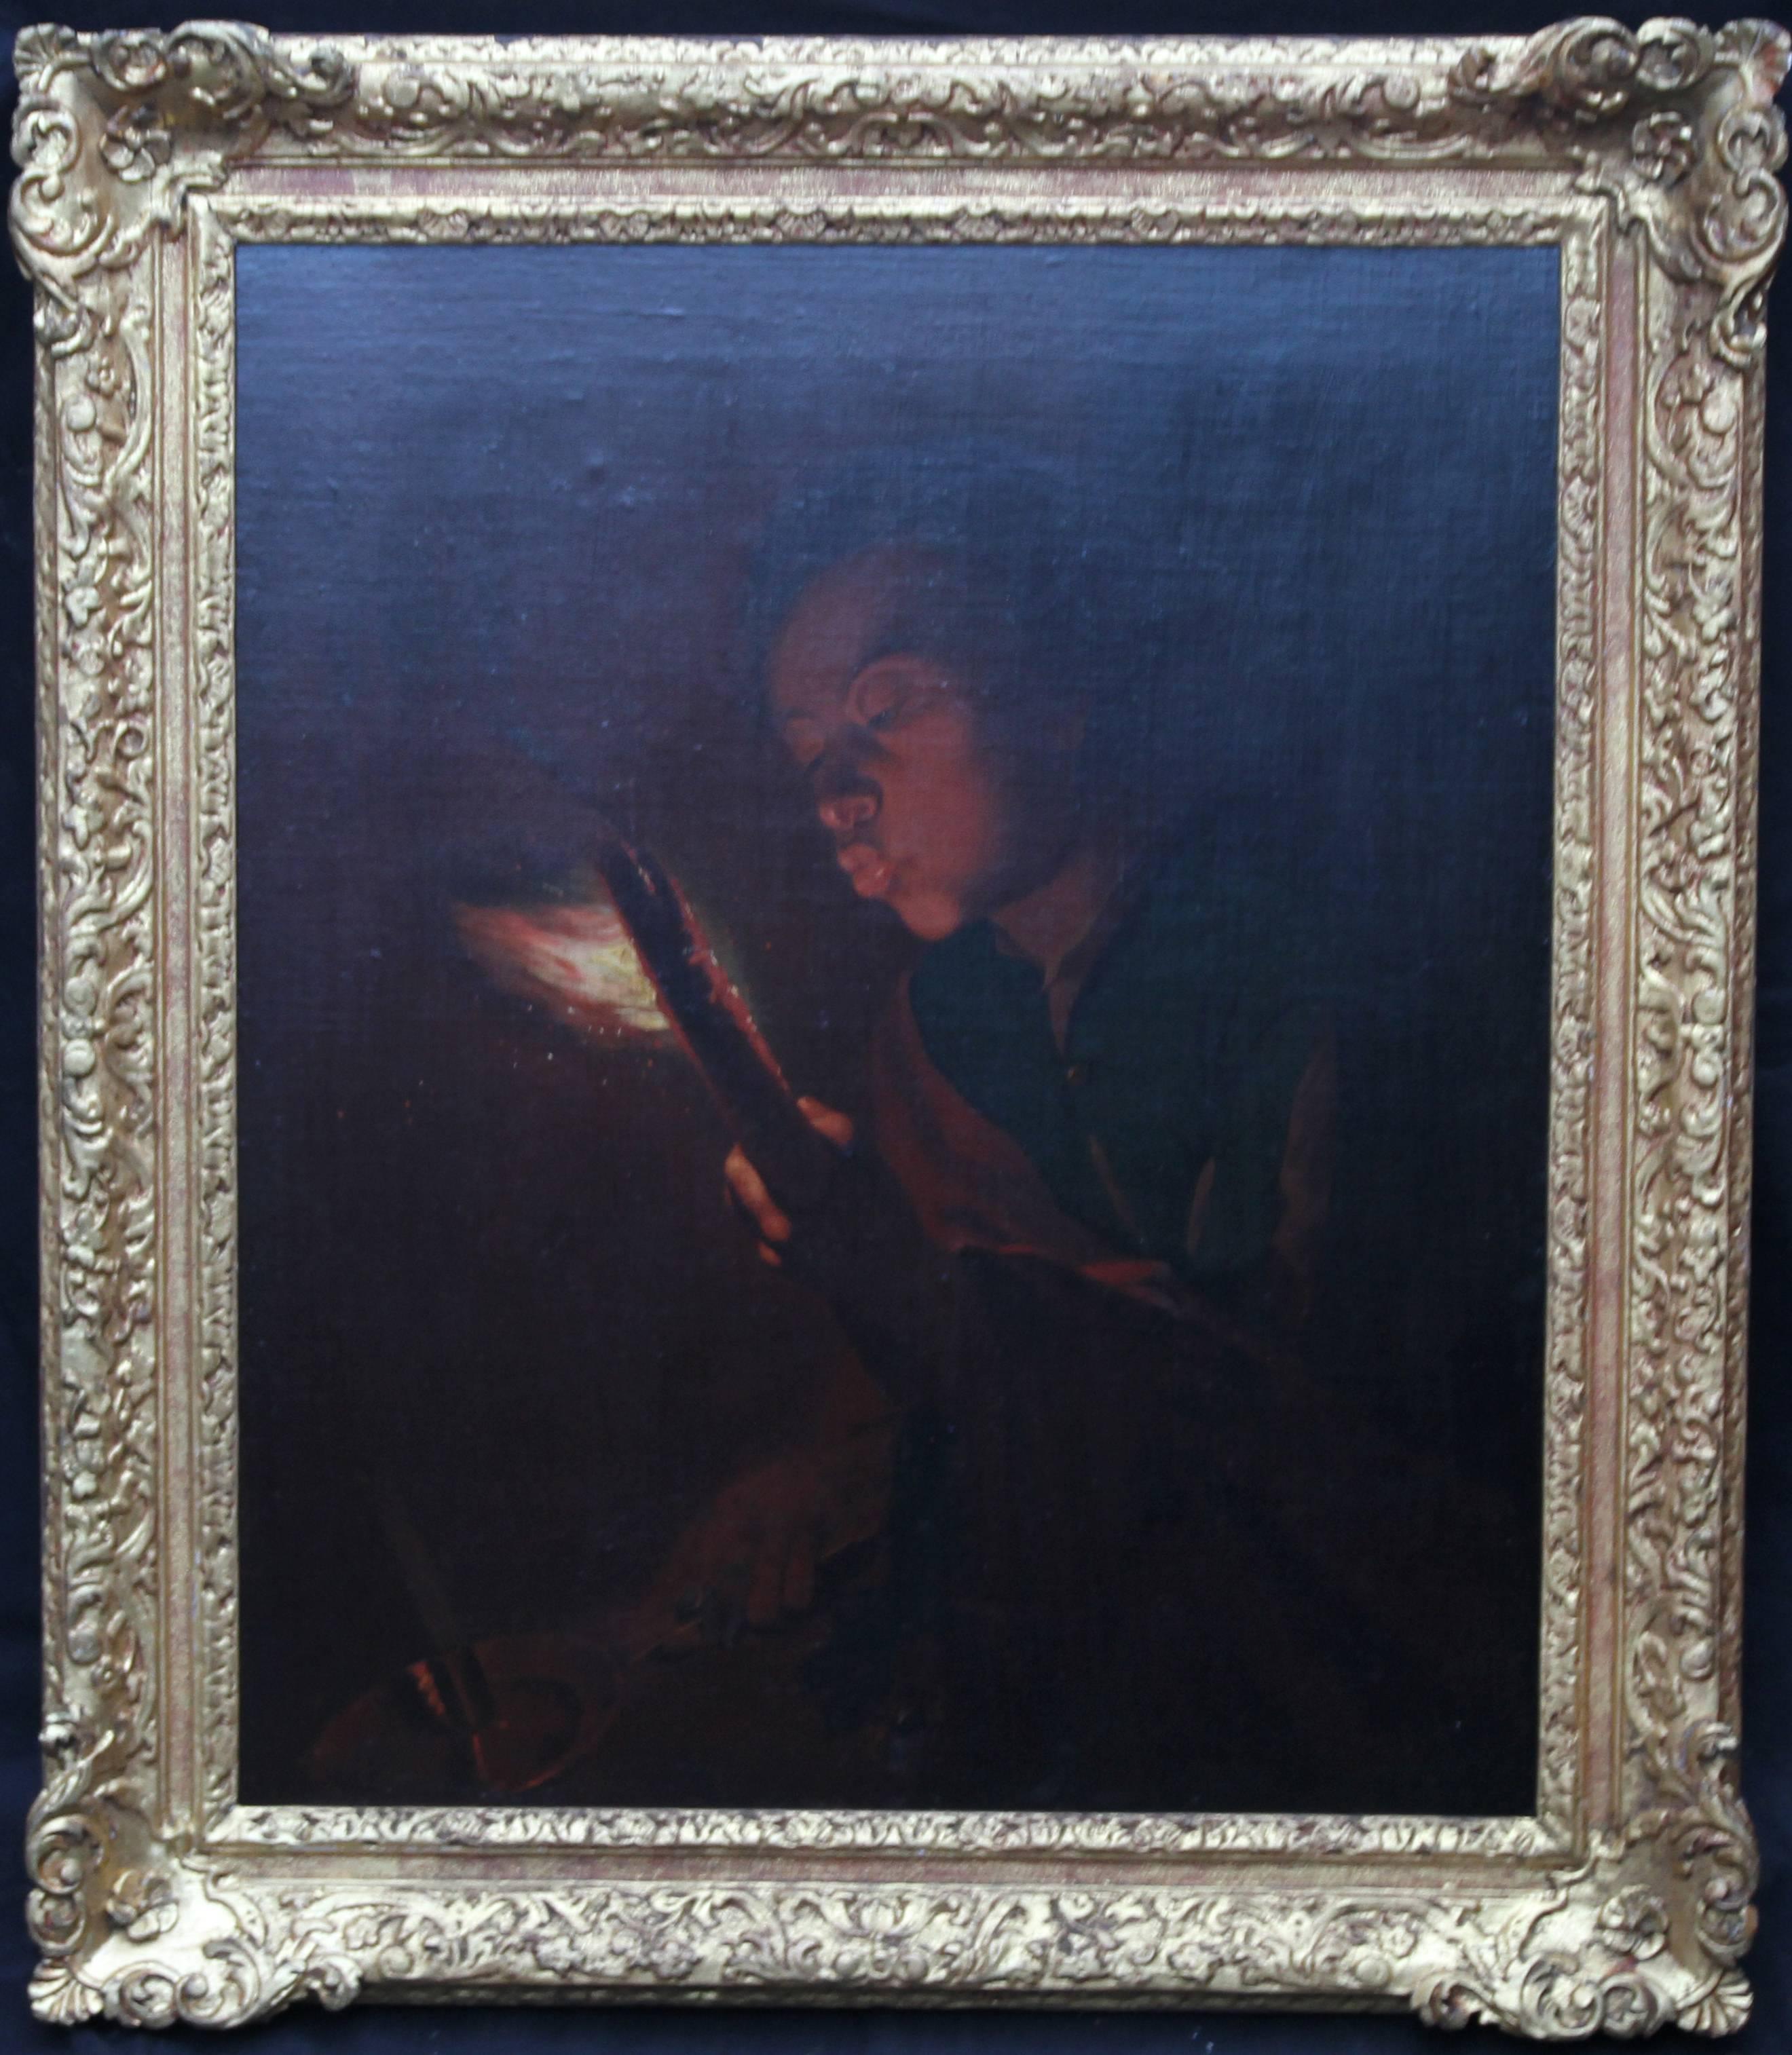 Godfried Schalcken (circle) Portrait Painting - Boy Blowing a Candle - Old Master Dutch oil painting classical candlelight genre